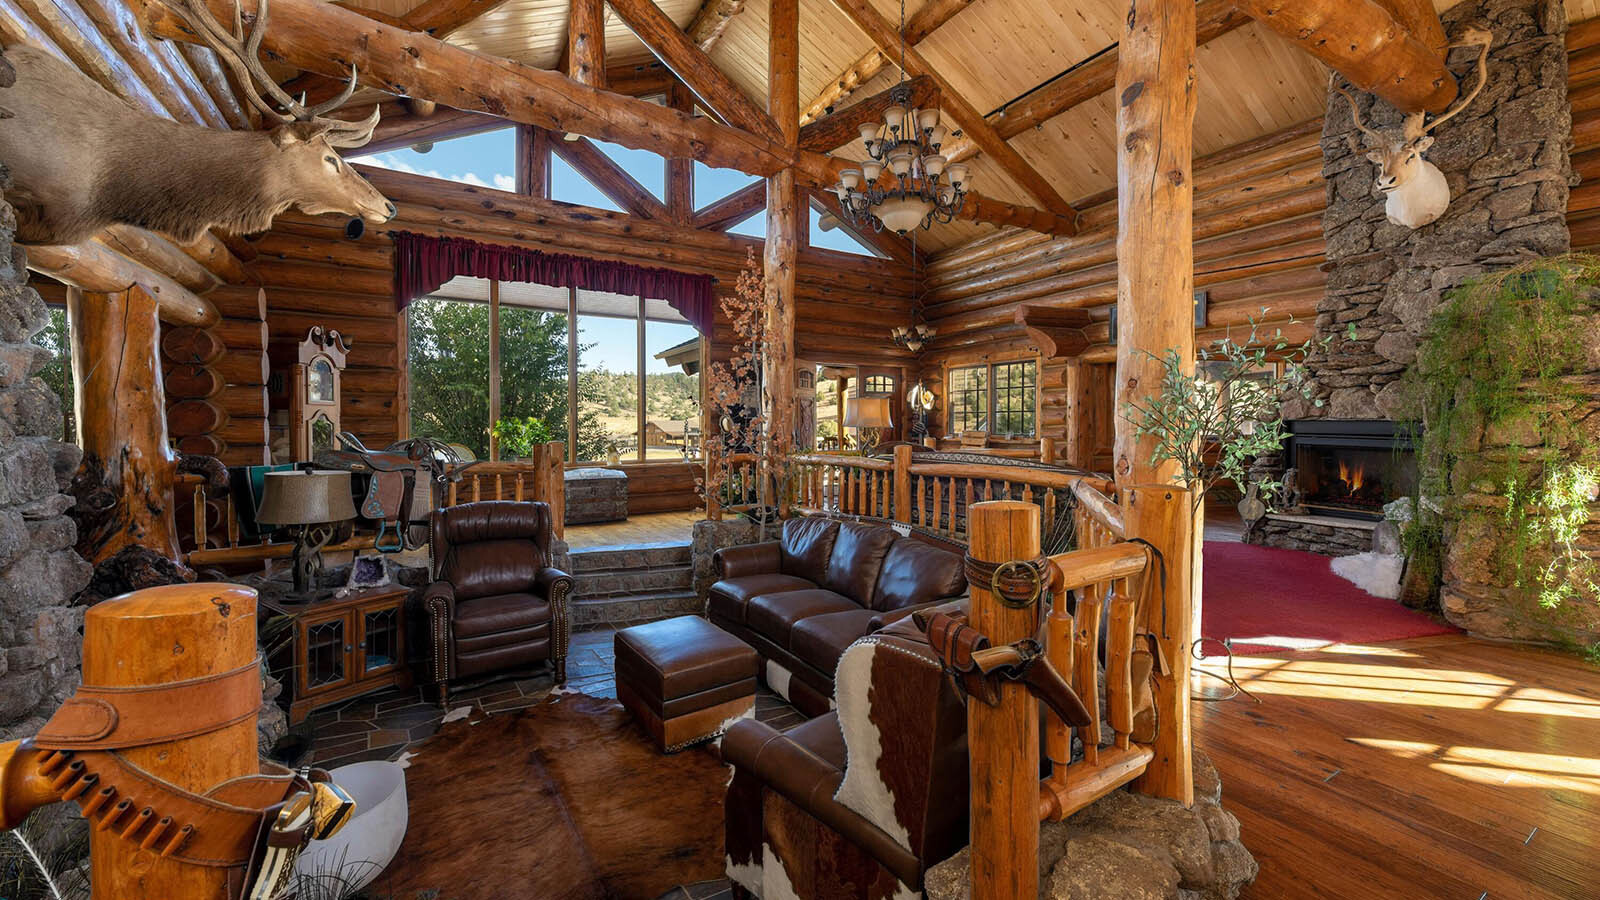 For Sale: Ranch With Complete Old West Town, Only $3.7 million